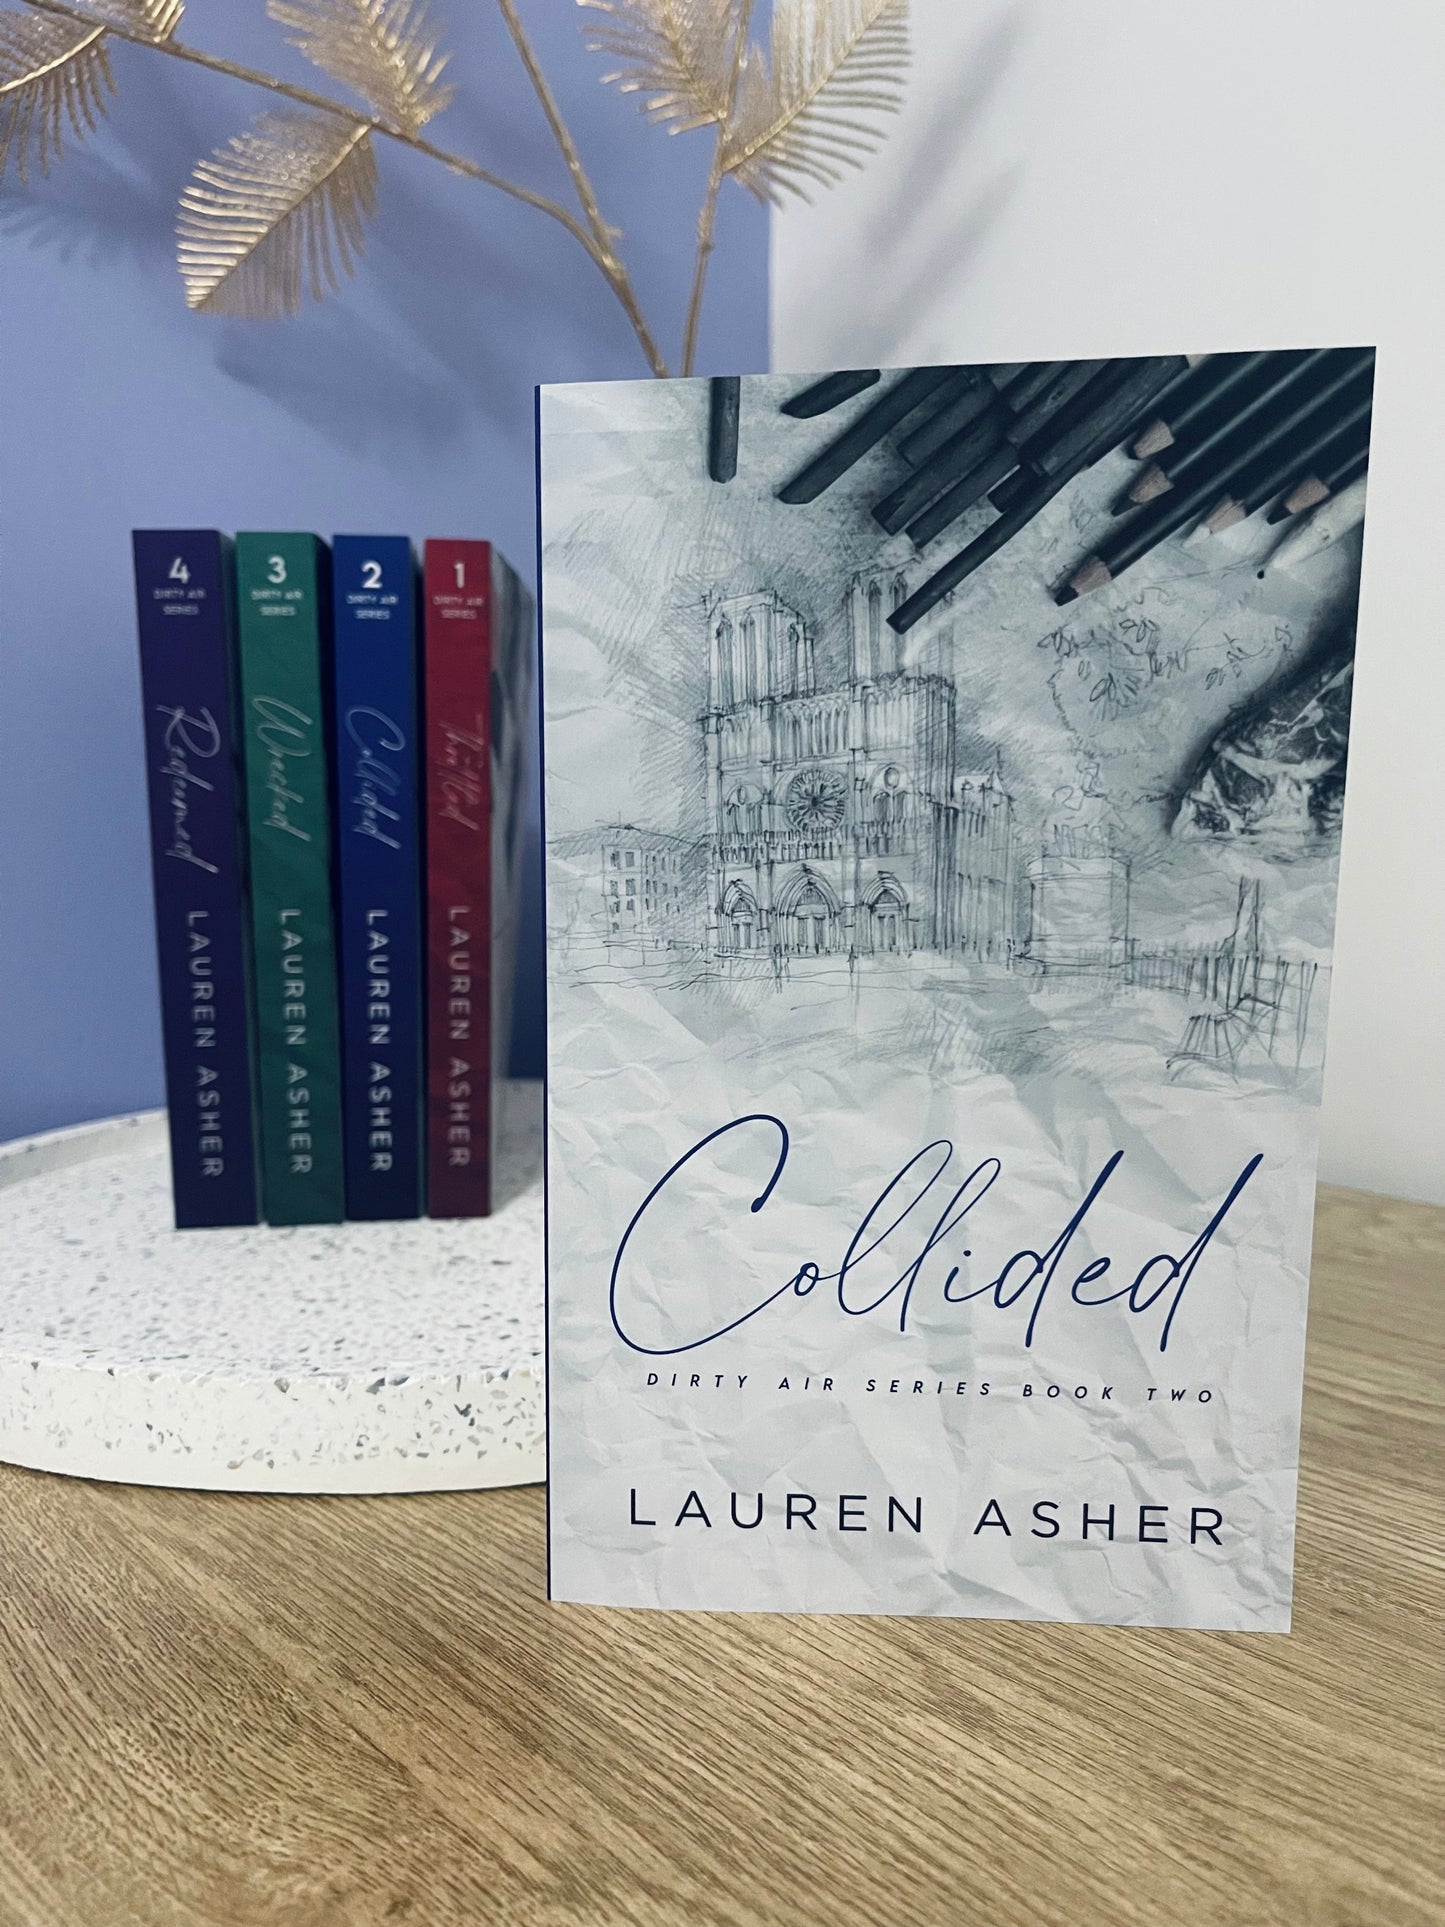 Collided by Lauren Asher - Special Edition